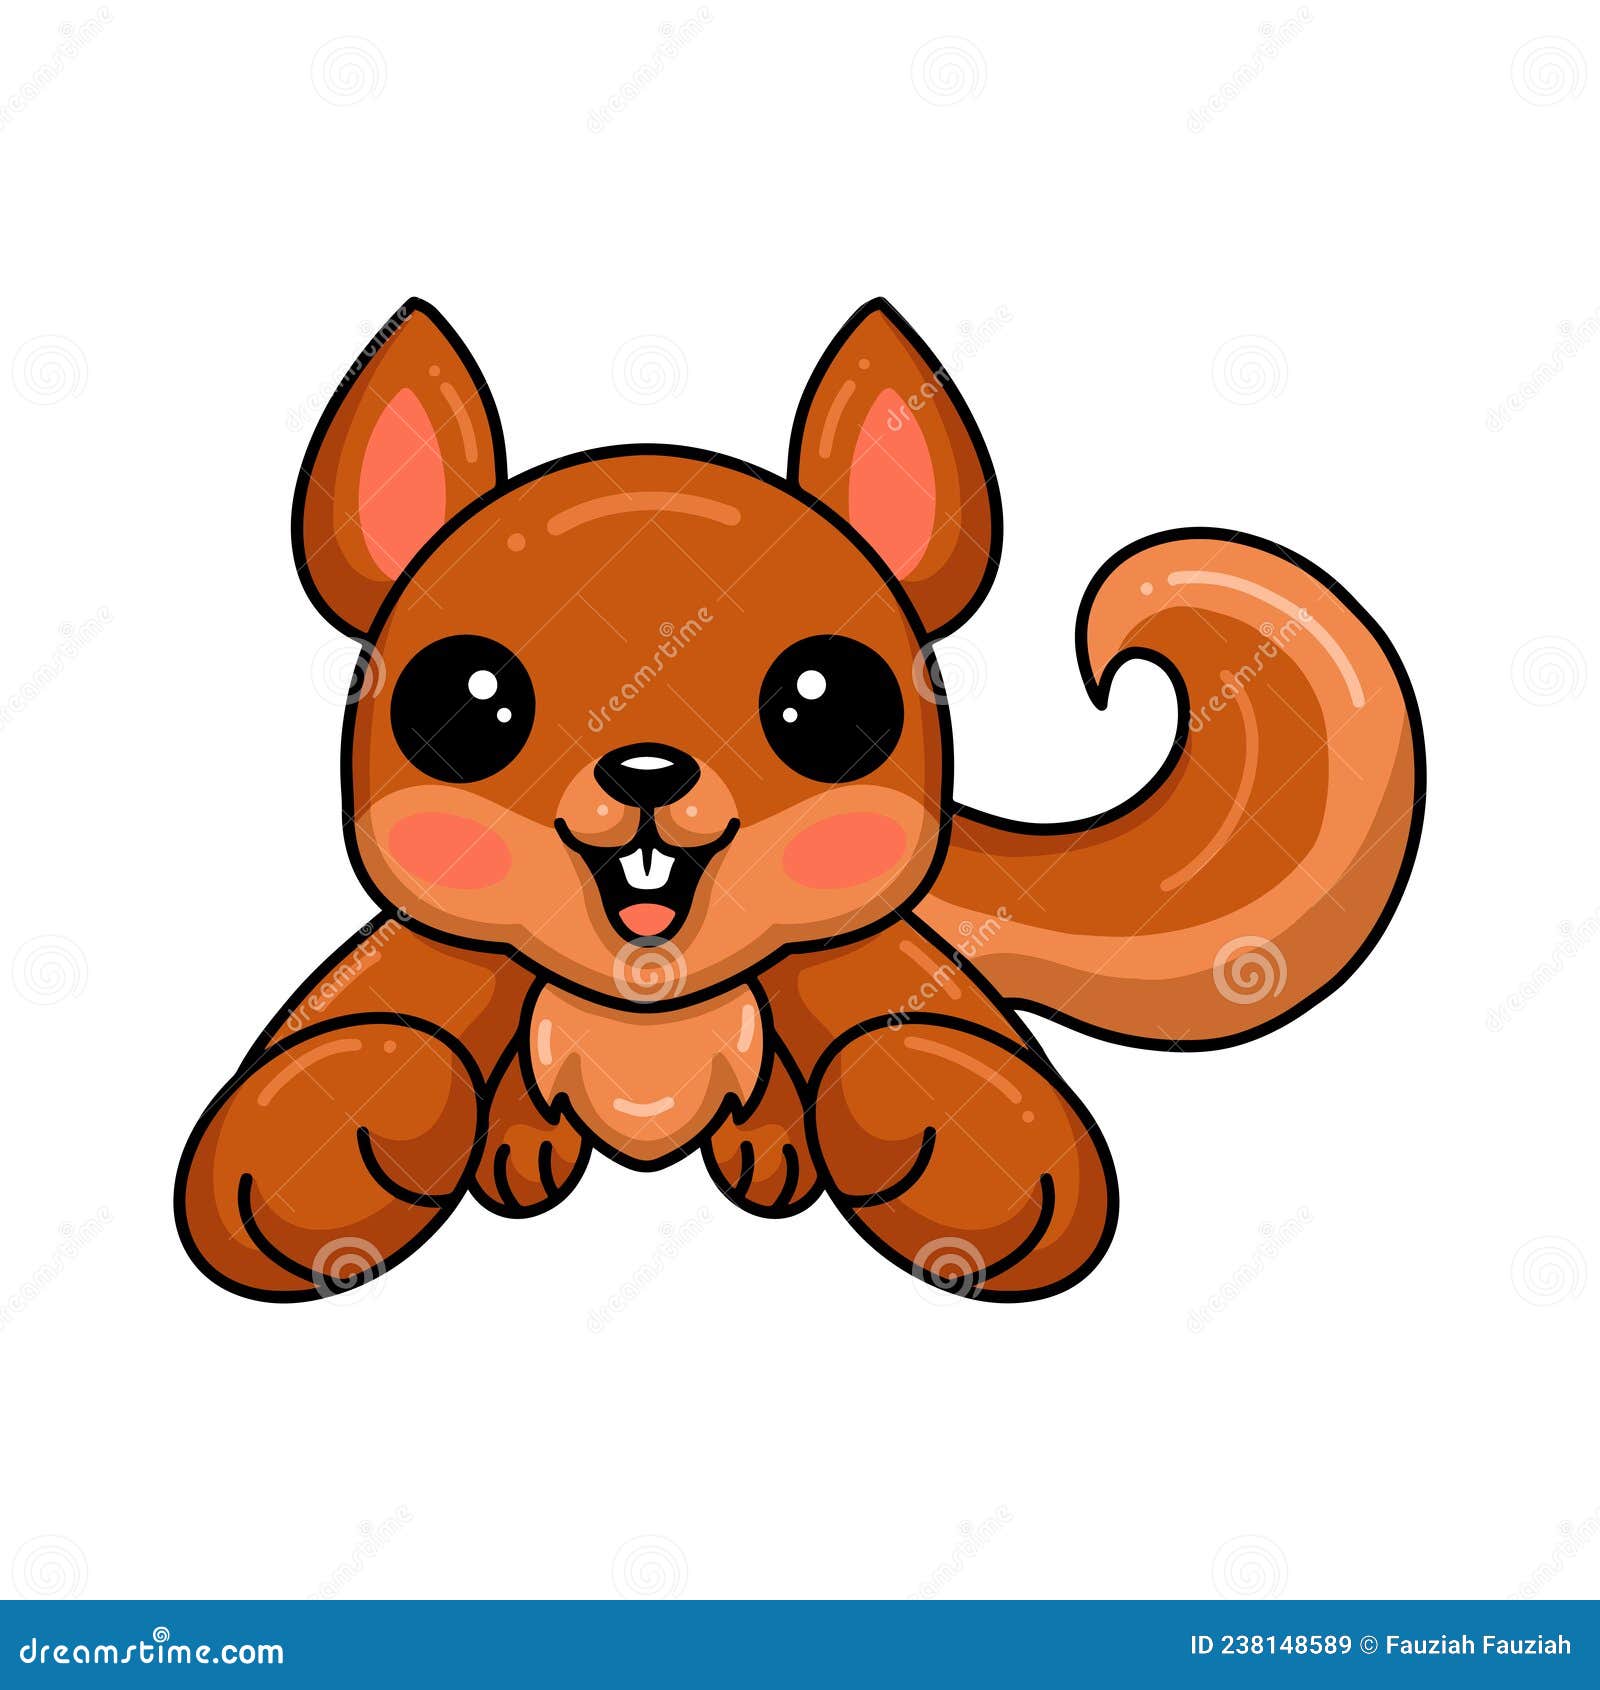 Cute Little Squirrel Cartoon Leaping Stock Vector - Illustration of ...